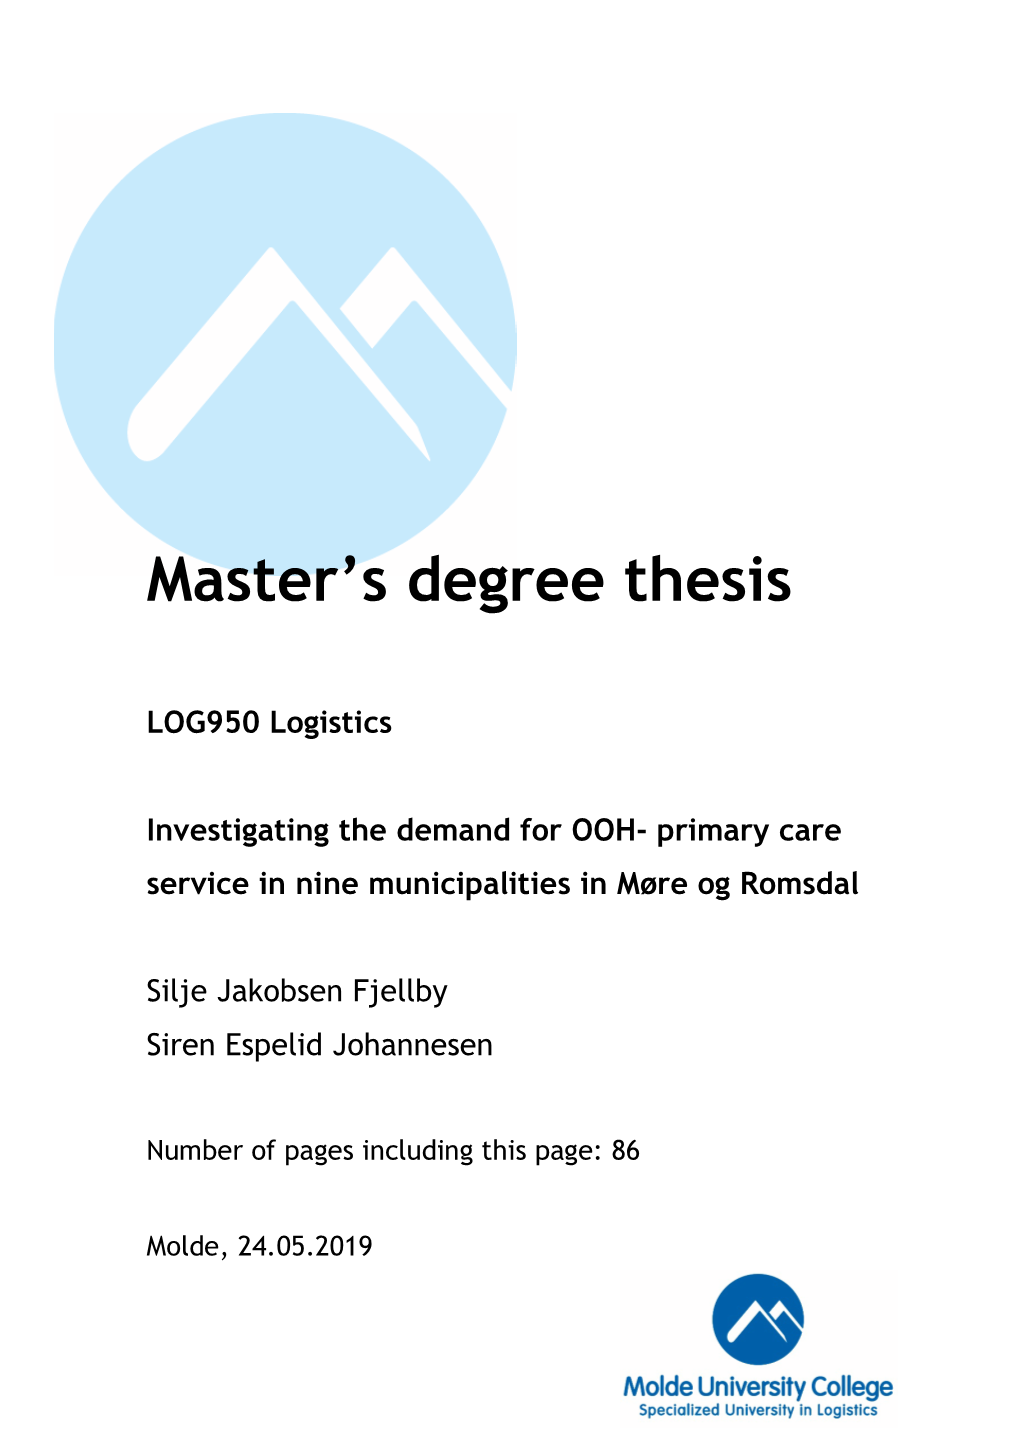 Master's Degree Thesis